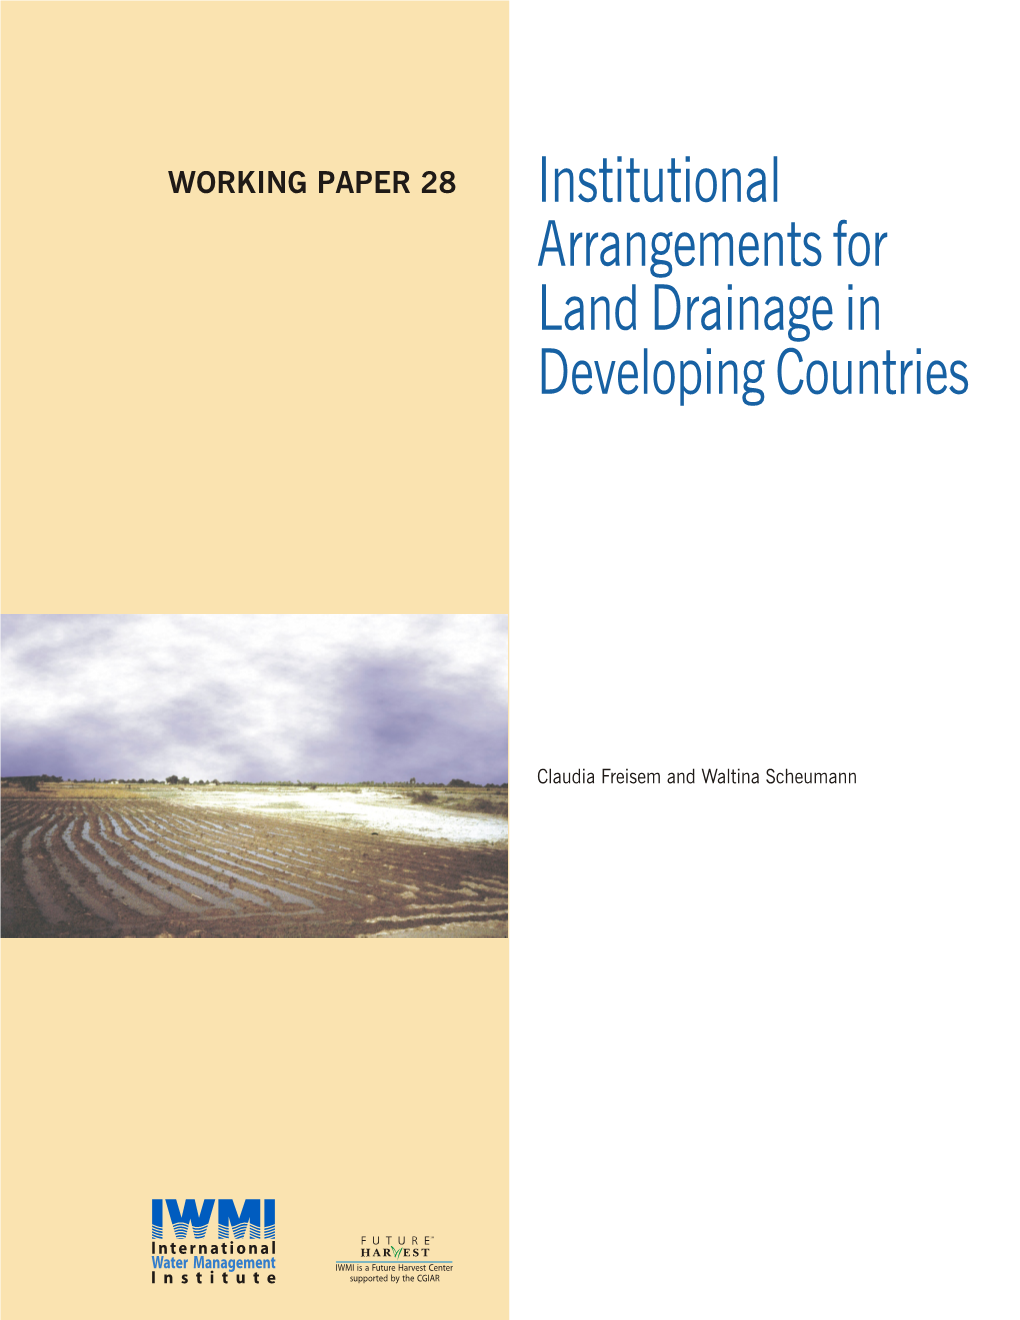 Institutional Arrangements for Land Drainage in Developing Countries